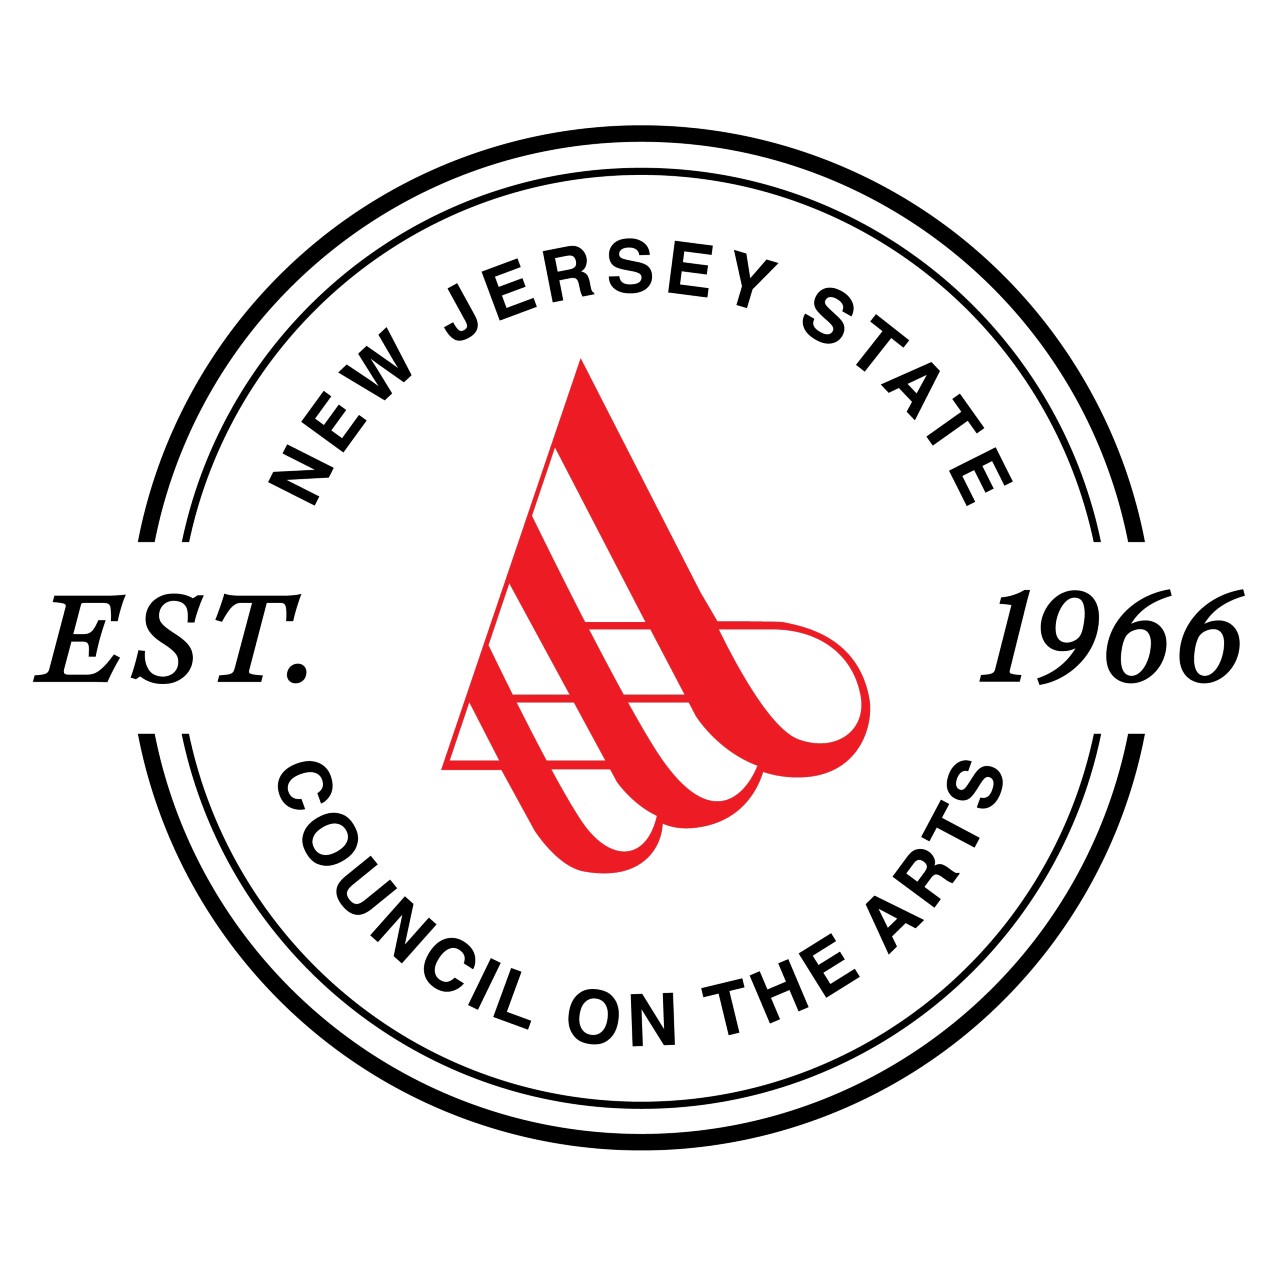 new jersey state council on the arts logo